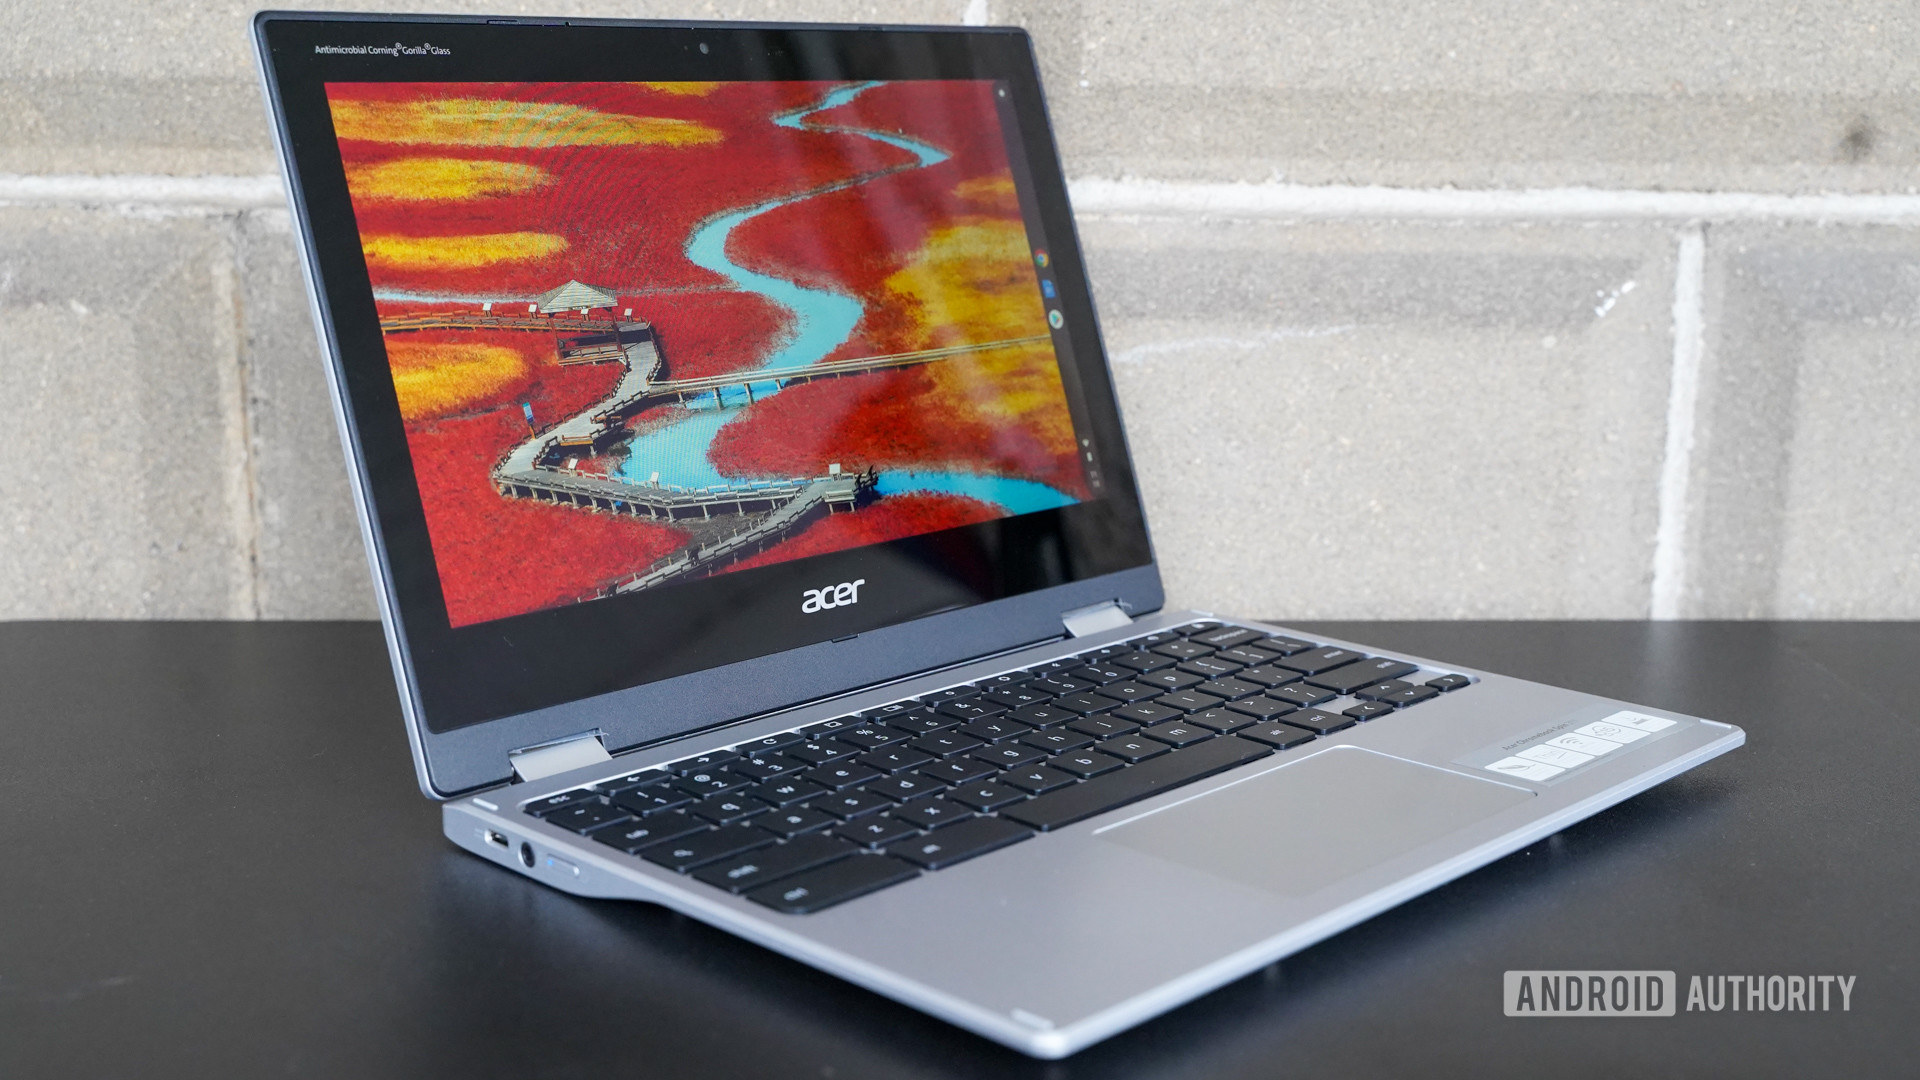 Google buys a company that turns old PCs into Chromebooks